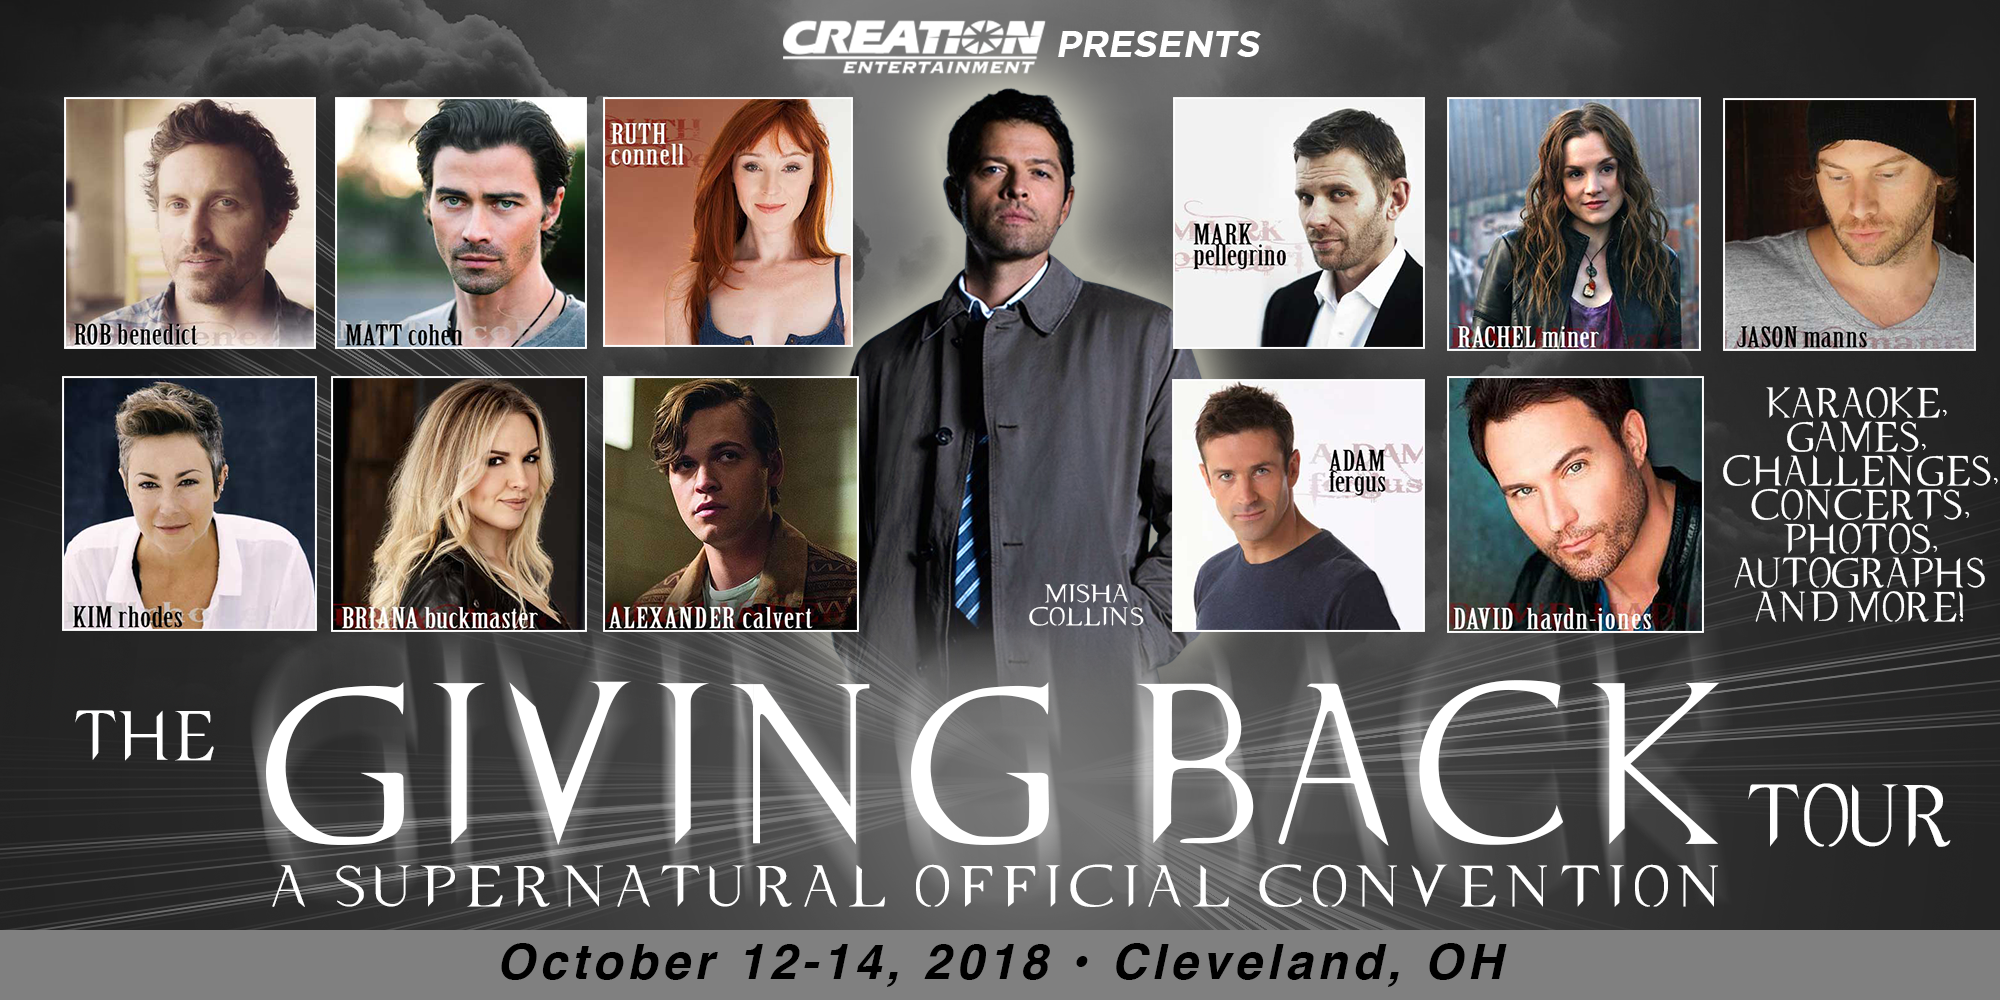 Creation Entertainment's Supernatural Offical Convention in Cleveland, OH